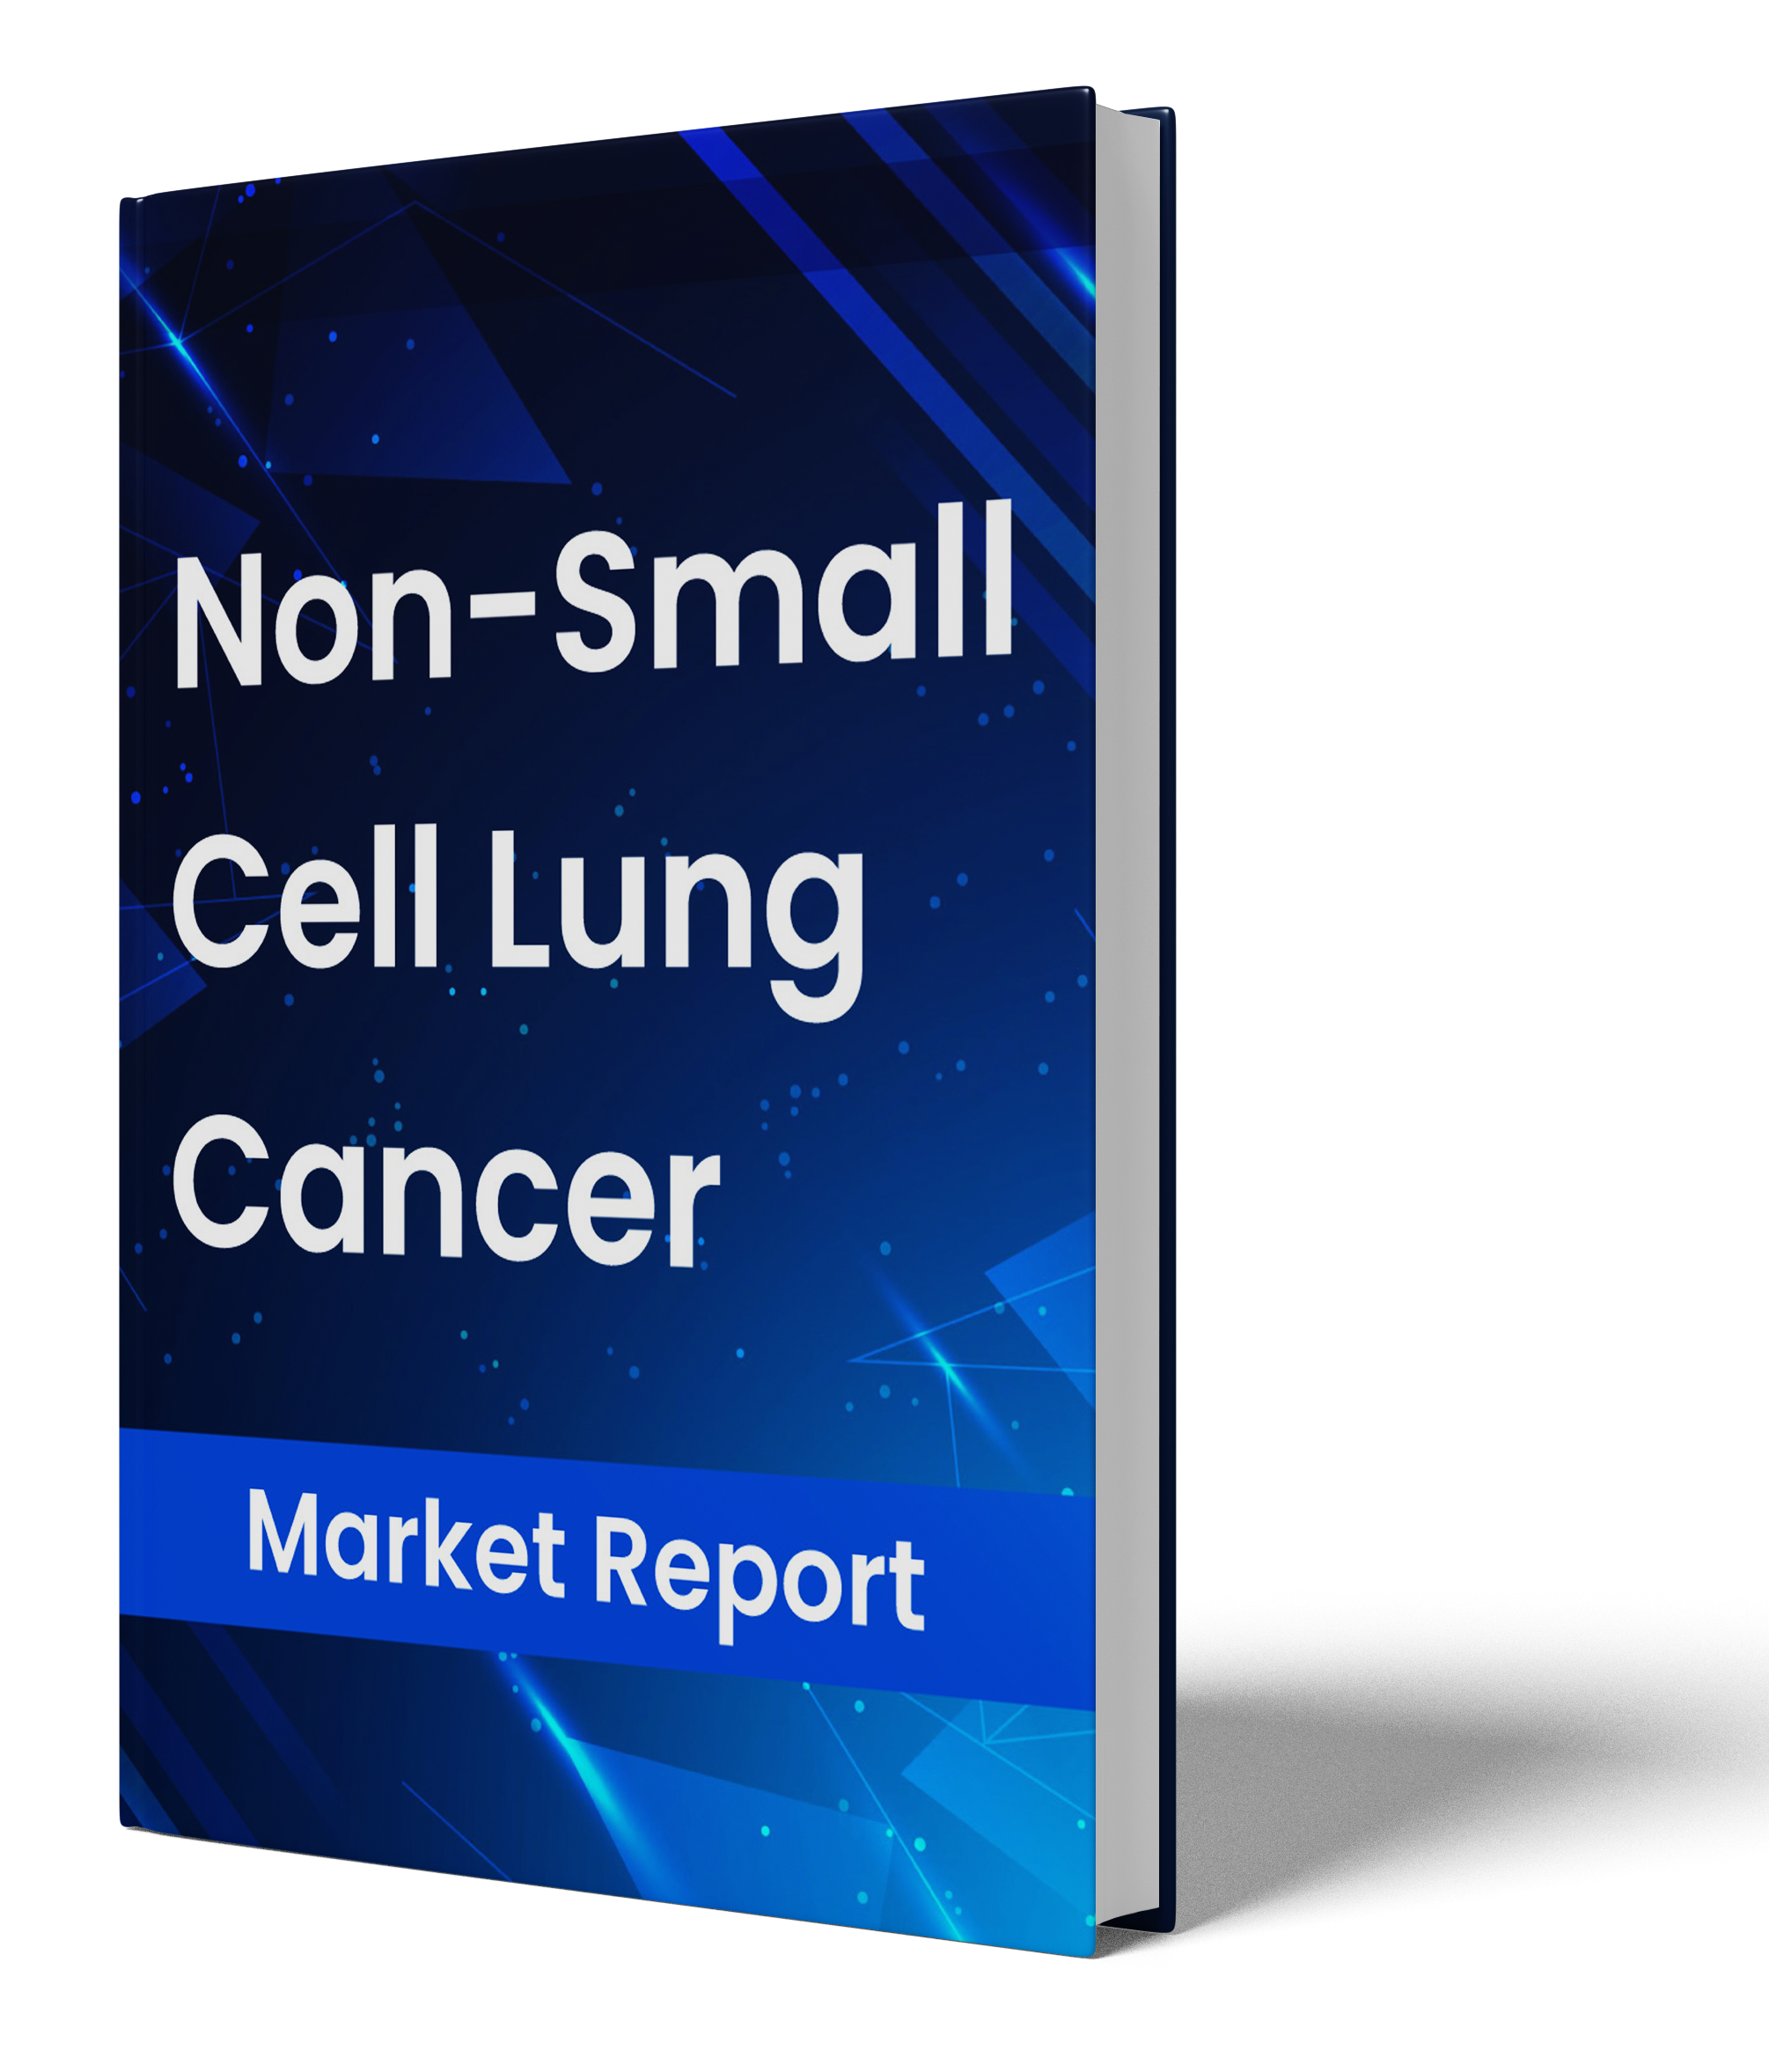 Non-Small Cell Lung Cancer Market Assessment Report